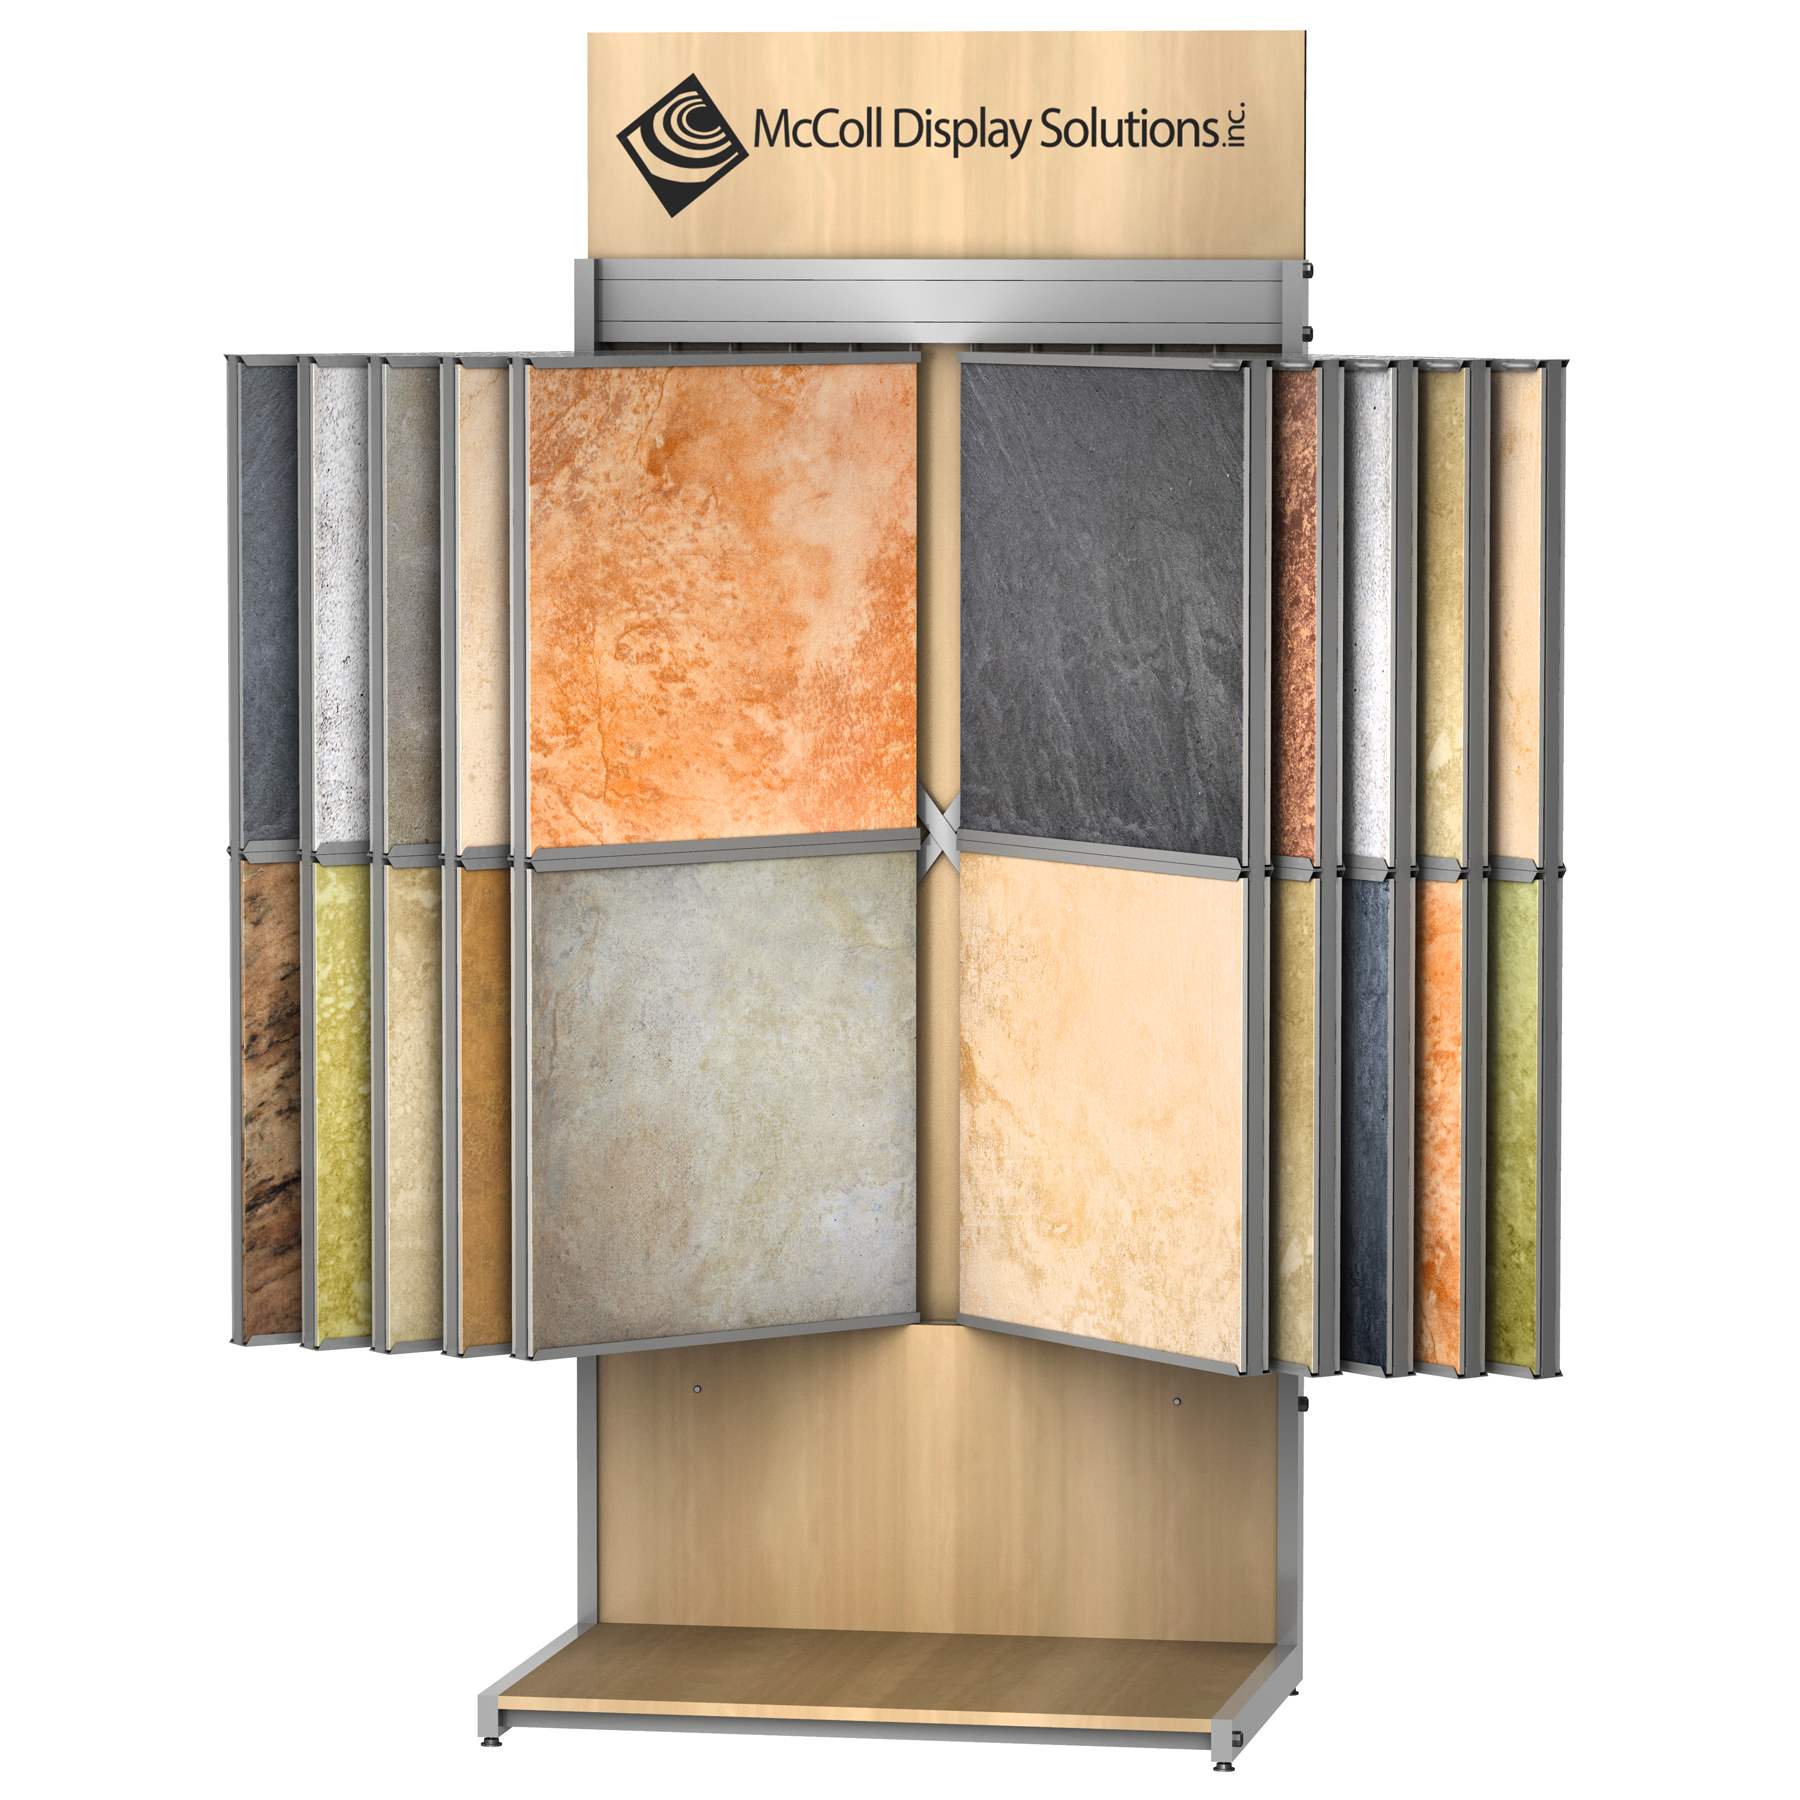 CD09 Wing Rack Tower With Loose Tile Samples Ceramic Porcelain Stone Marble Travertine Composite Flooring Channel System Showroom Displays McColl Display